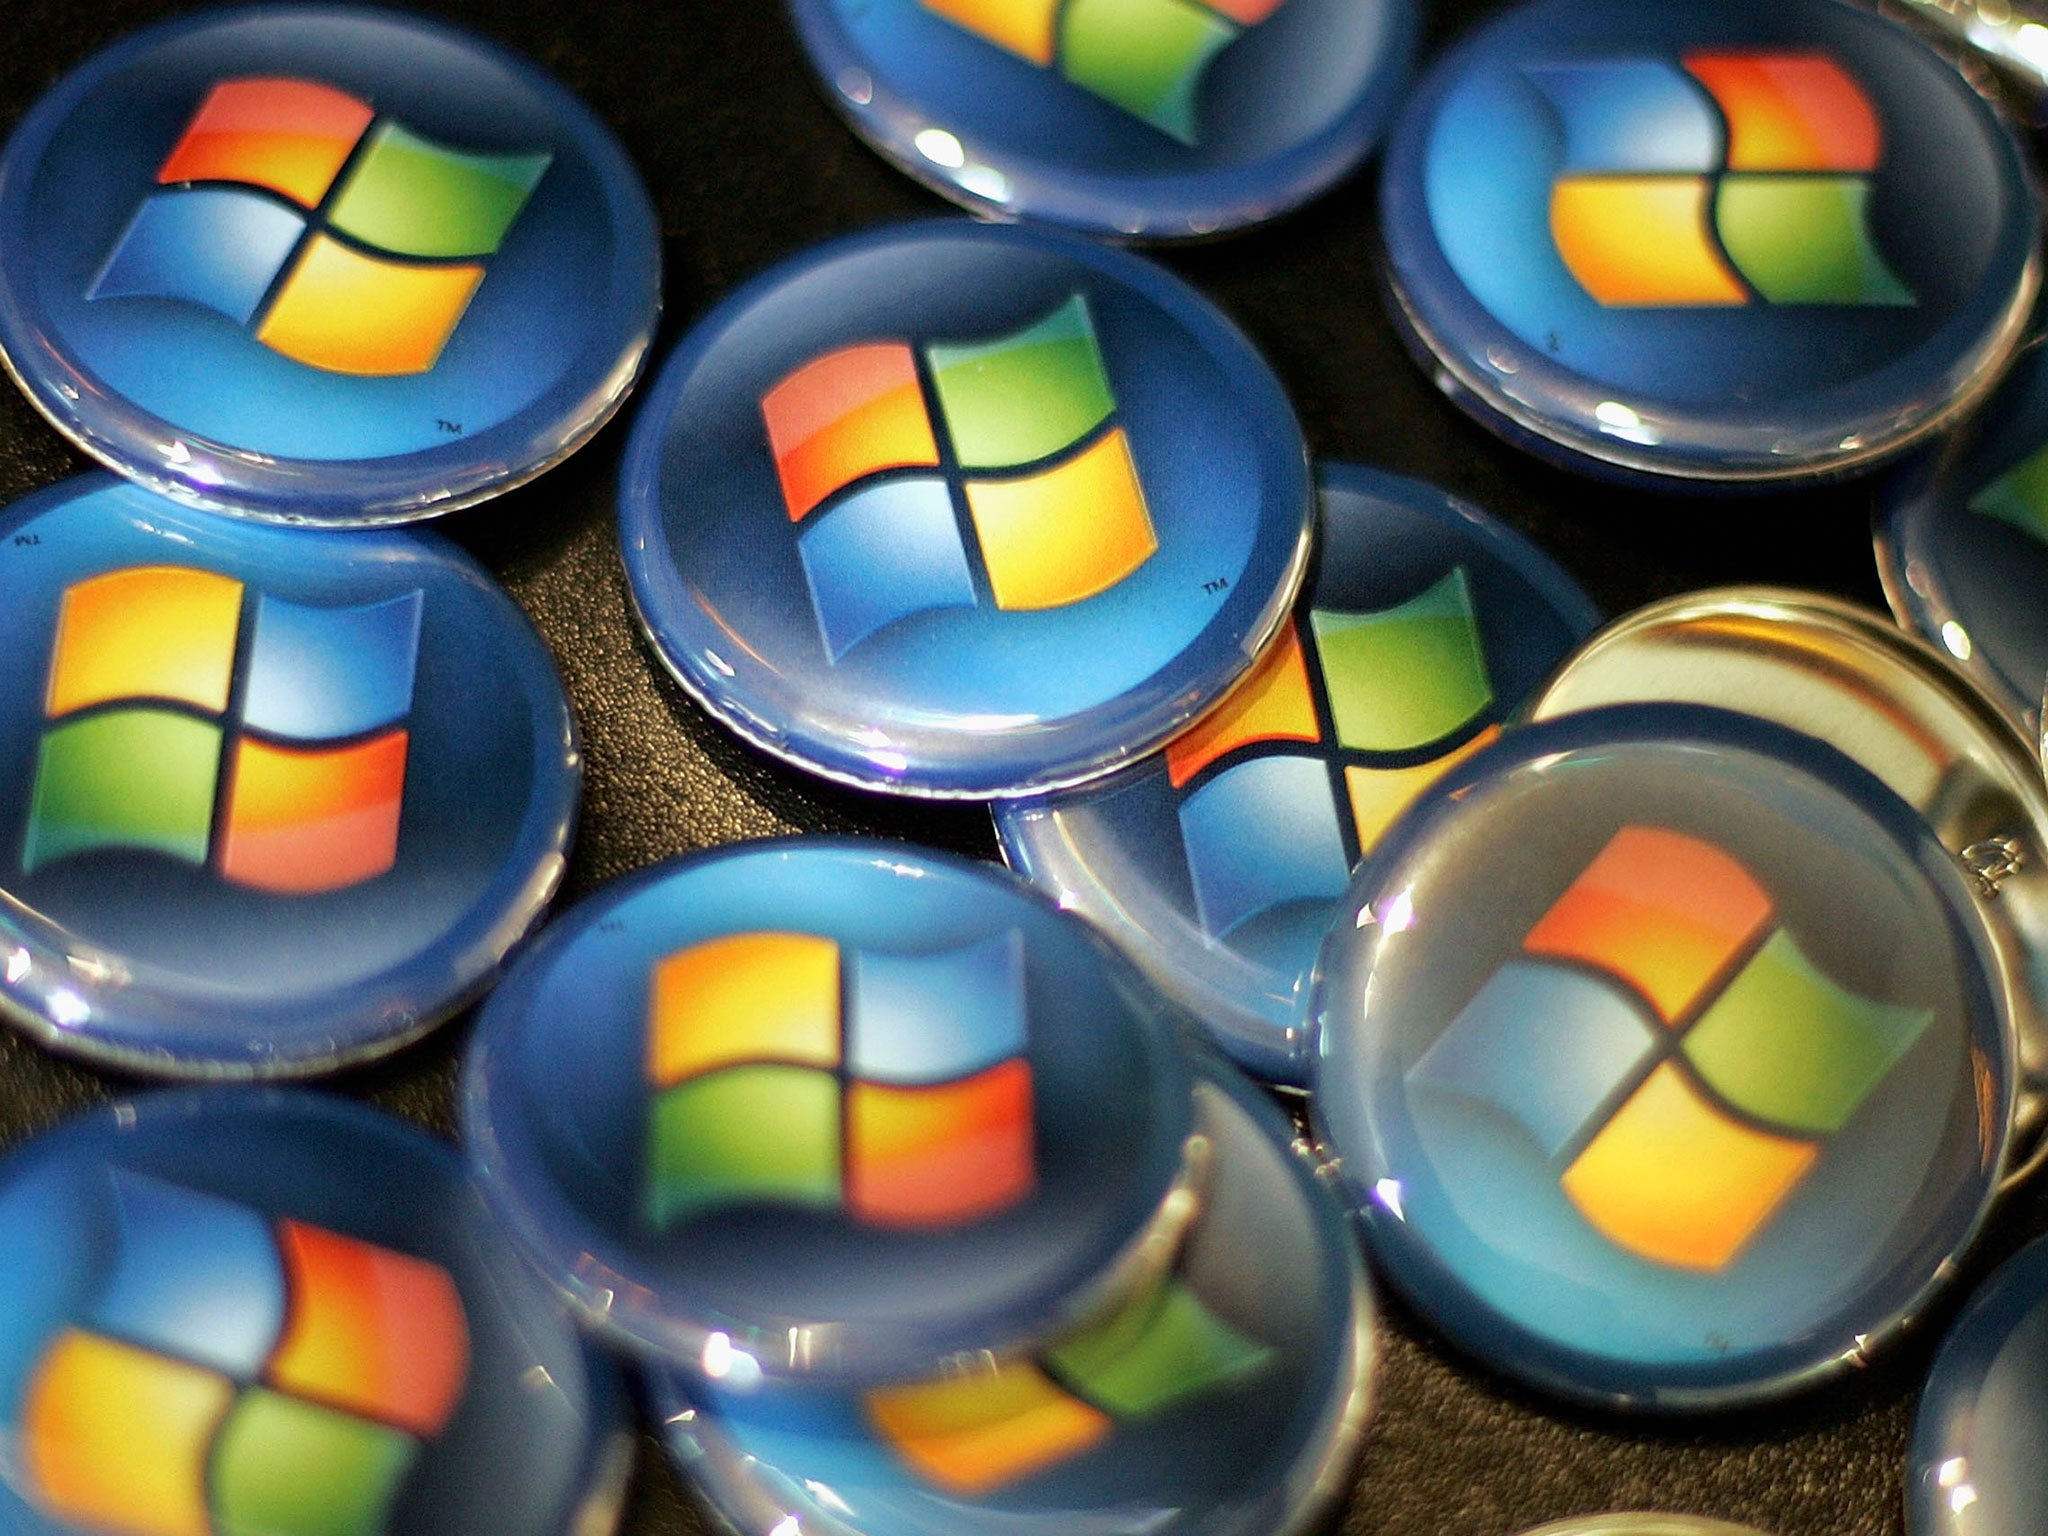 Buttons with the Microsoft logo